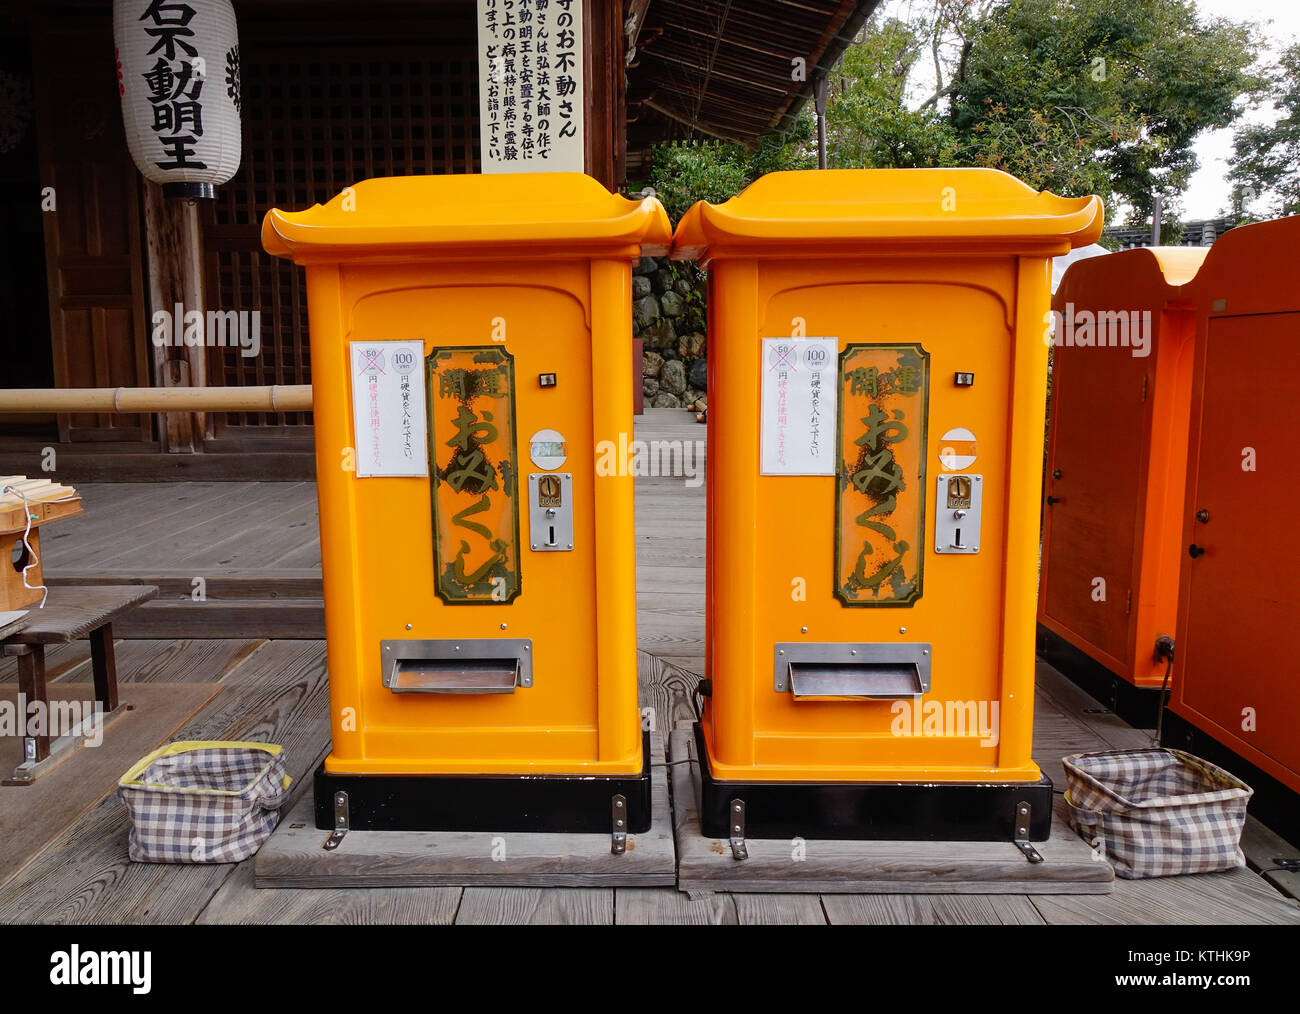 Kyoto, Japan - Dec 25, 2015. Yellow mail boxes at Kinkakuji Pagoda in Kyoto, Japan. Kinkakuji is a Zen temple in Kyoto whose top two floors are comple Stock Photo